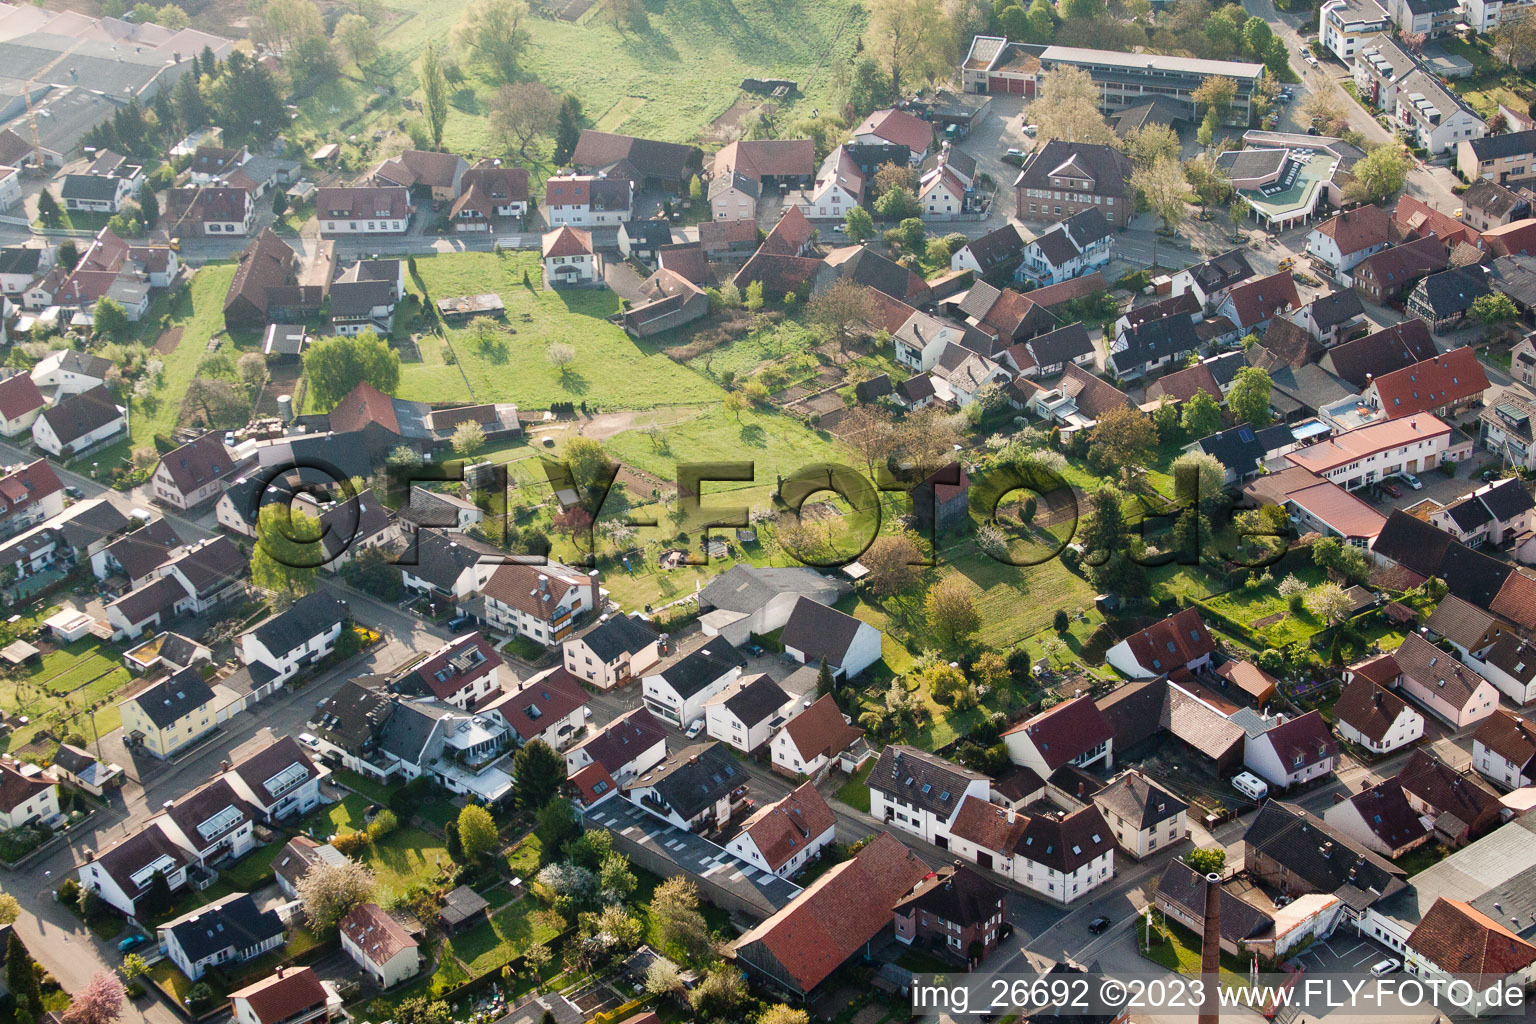 Drone image of District Stupferich in Karlsruhe in the state Baden-Wuerttemberg, Germany